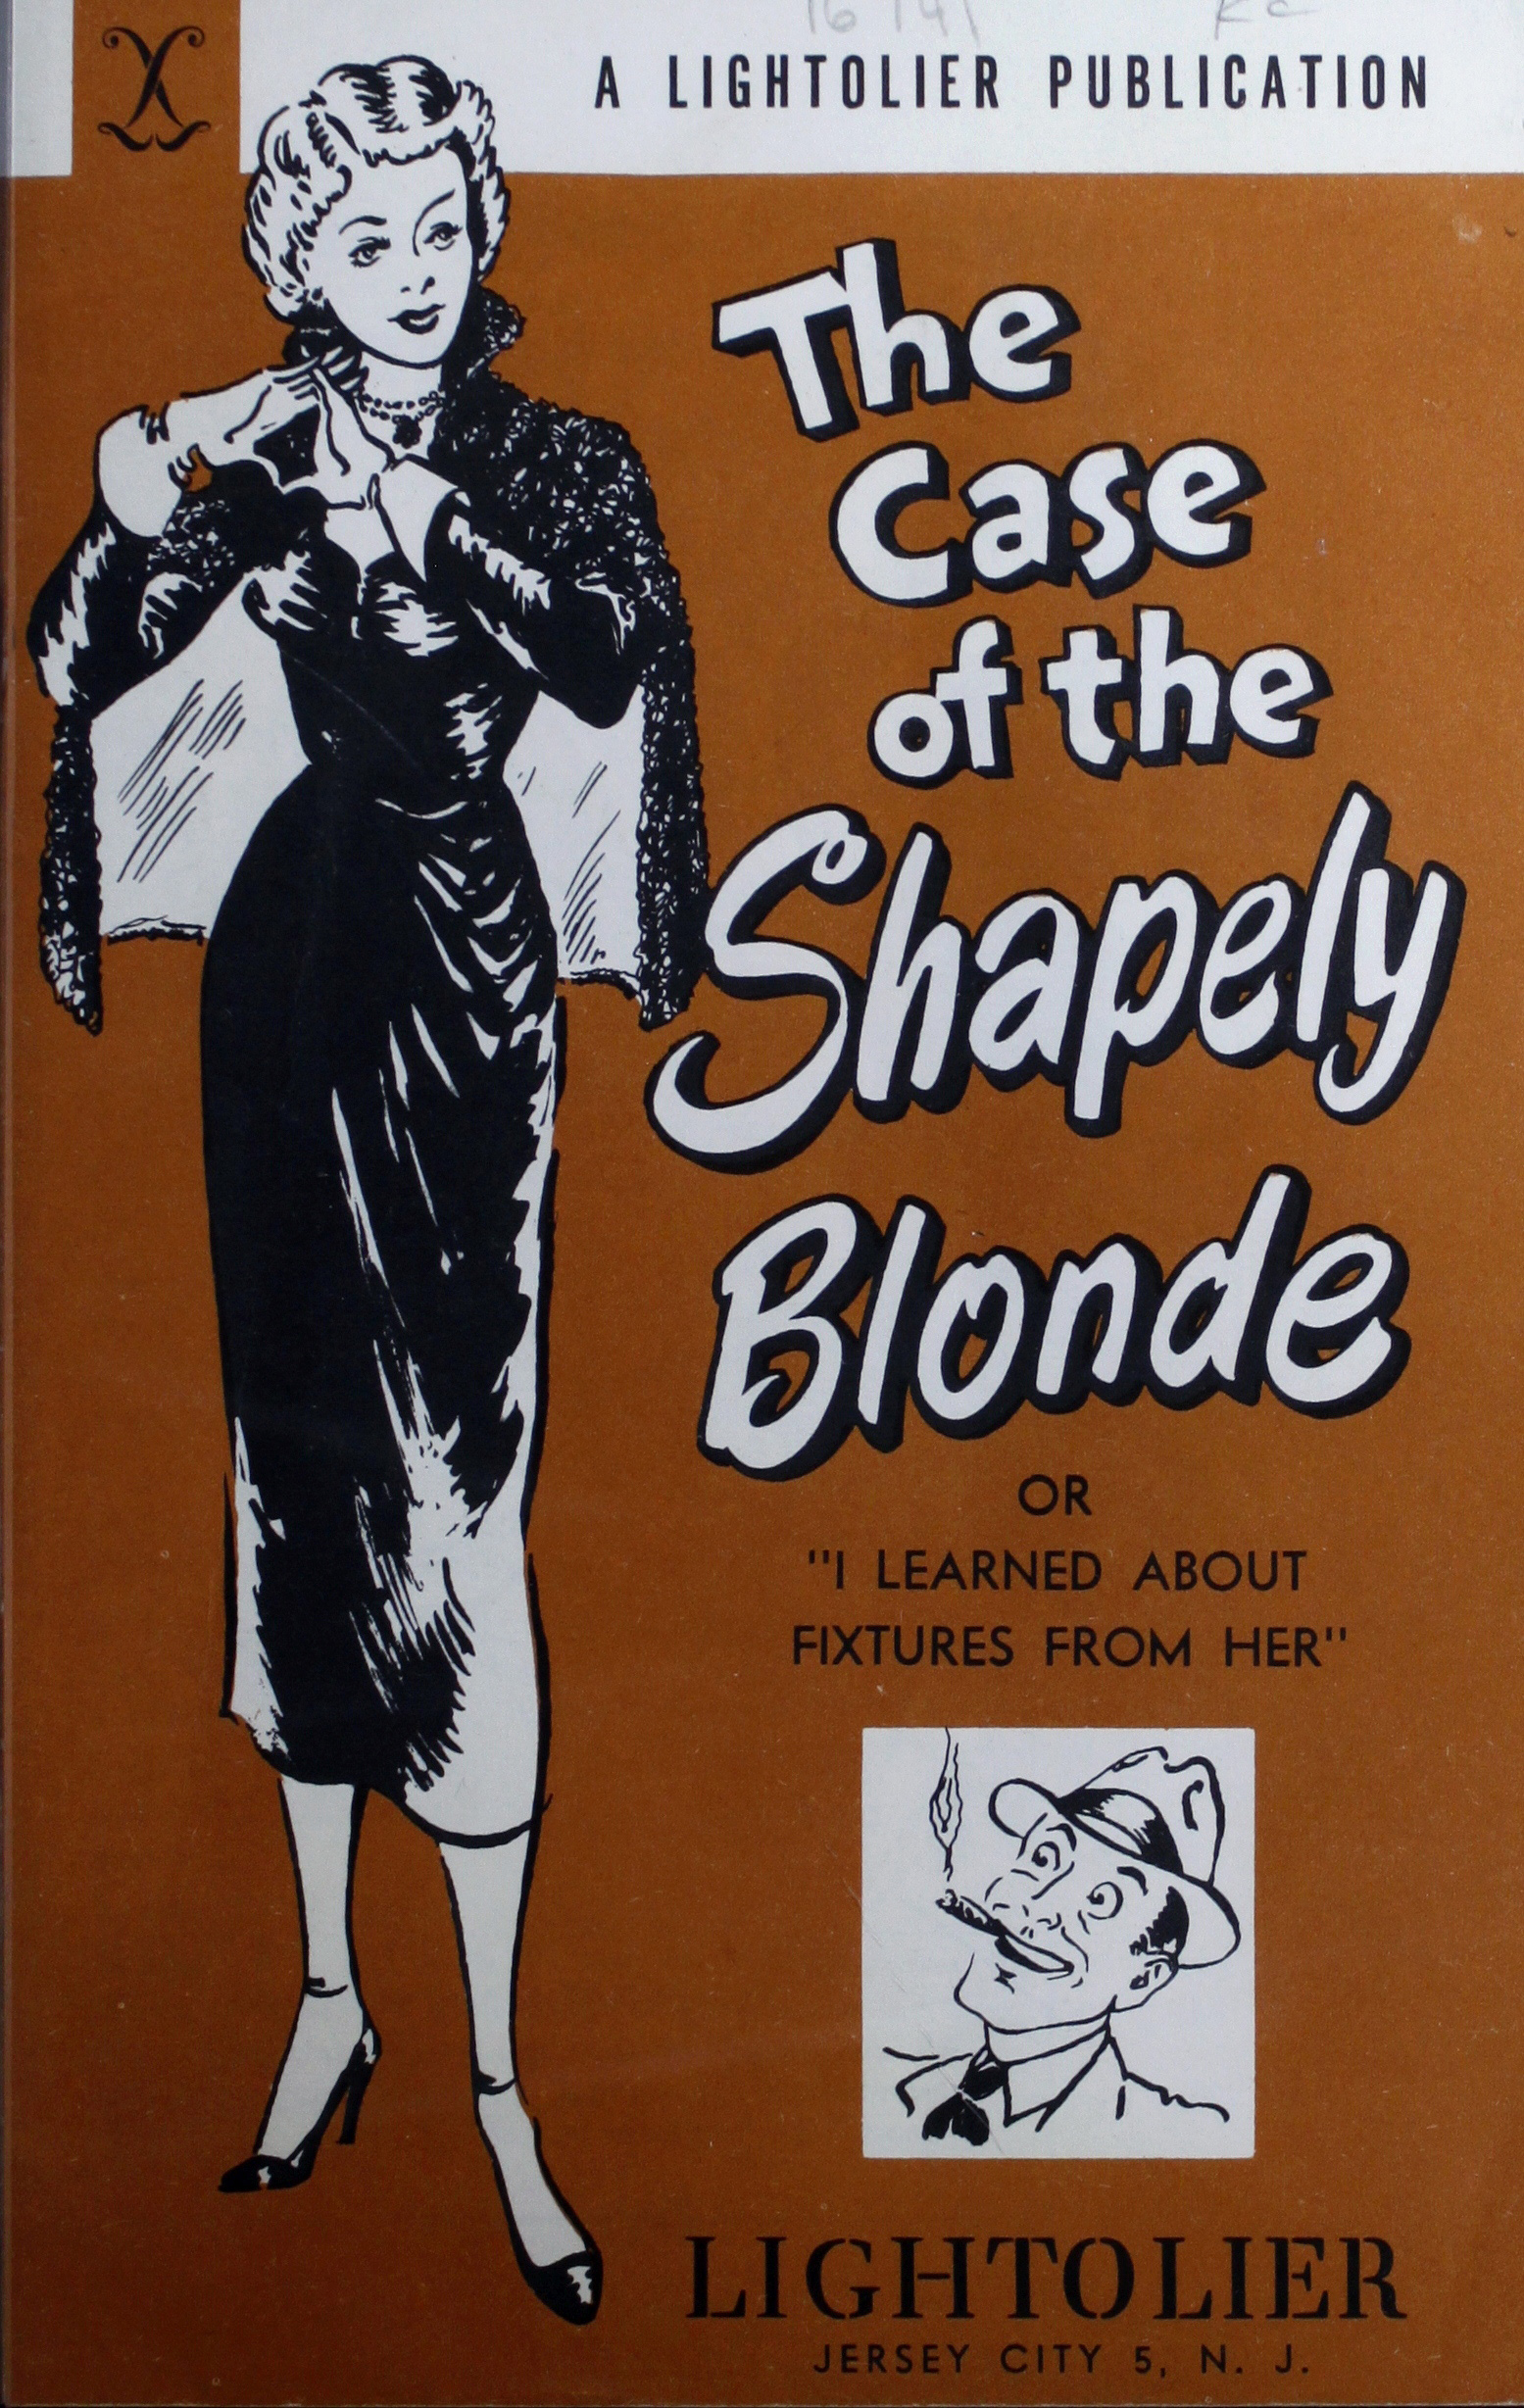 Pamphlet for light fixtures titled "The Case of the Shapely Blonde". Illustration in noirish style of a well-dressed woman and a inset illustration of a private eye's headshot.